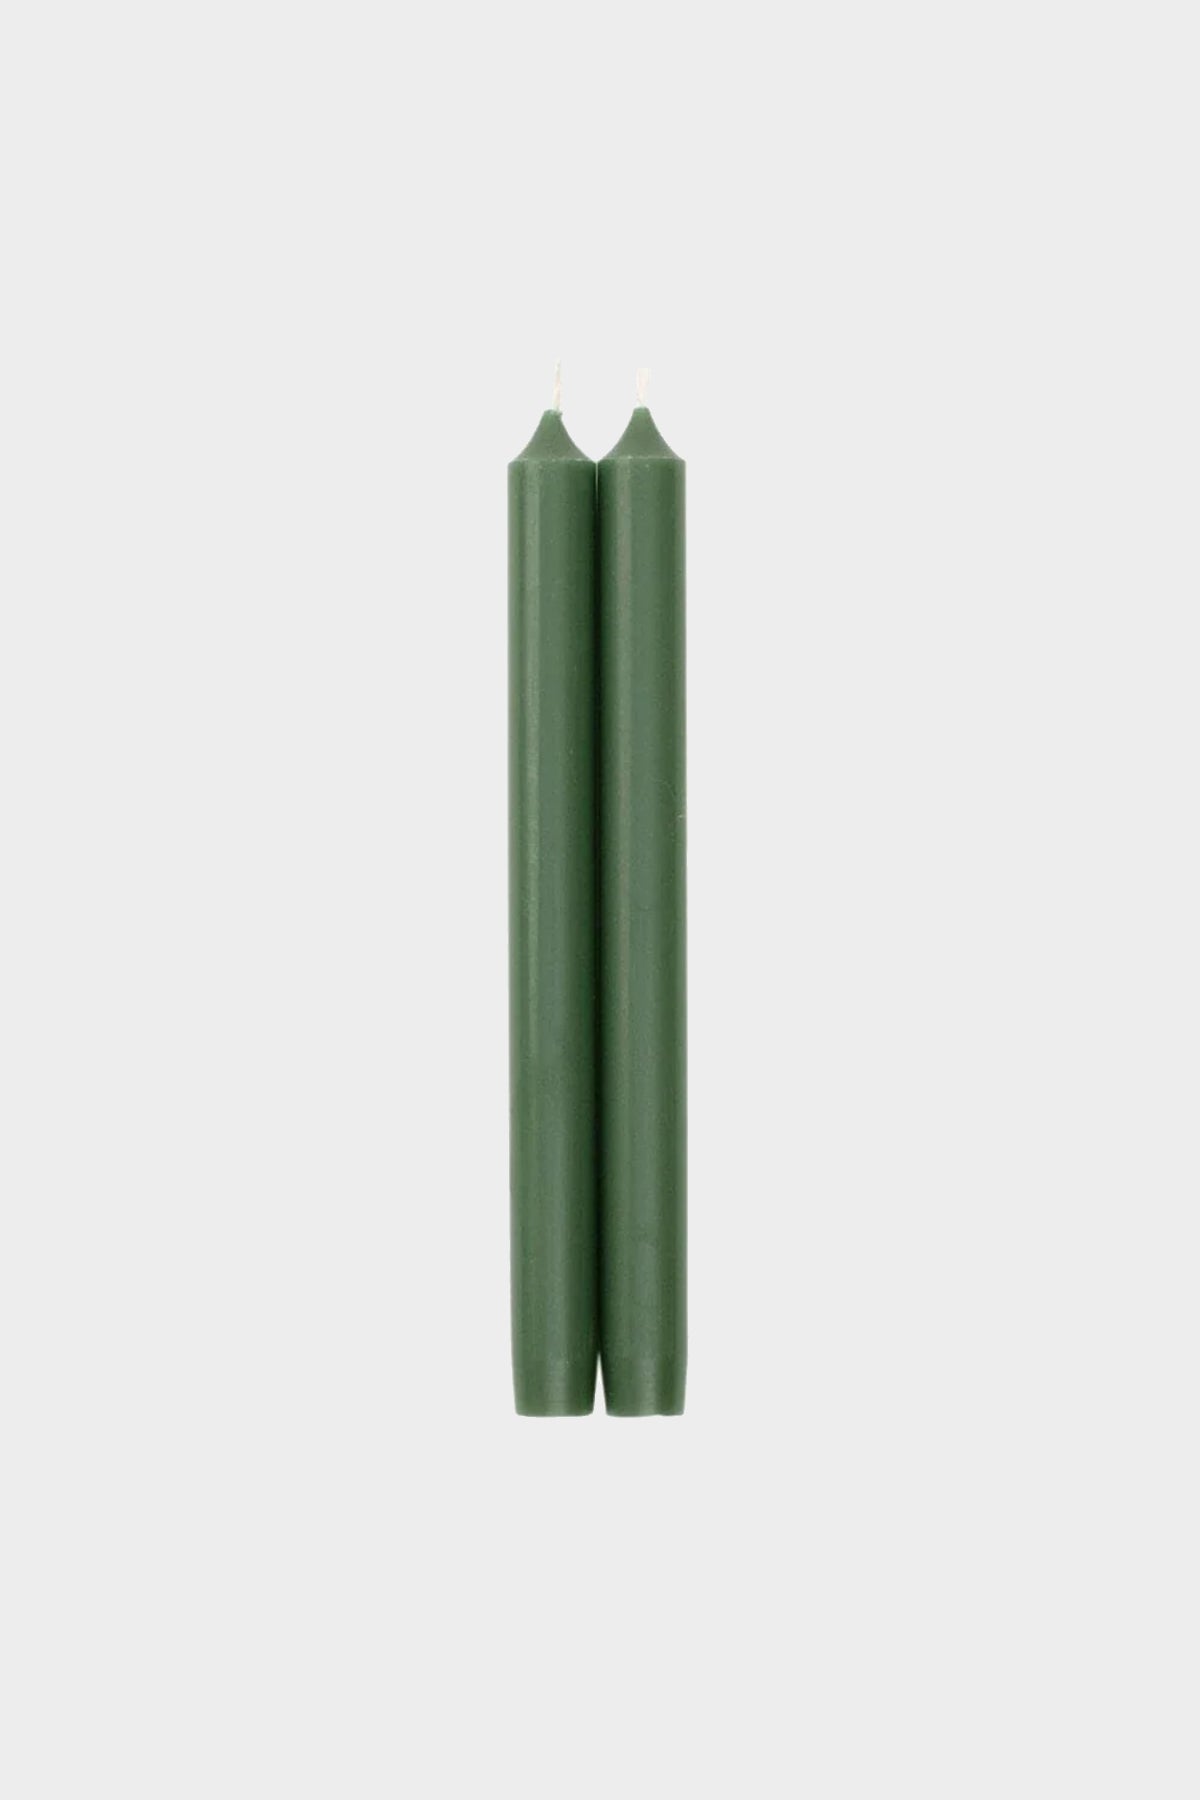 Straight Taper 10" Candles in Hunter Green - 2 Candles Per Package - shop-olivia.com